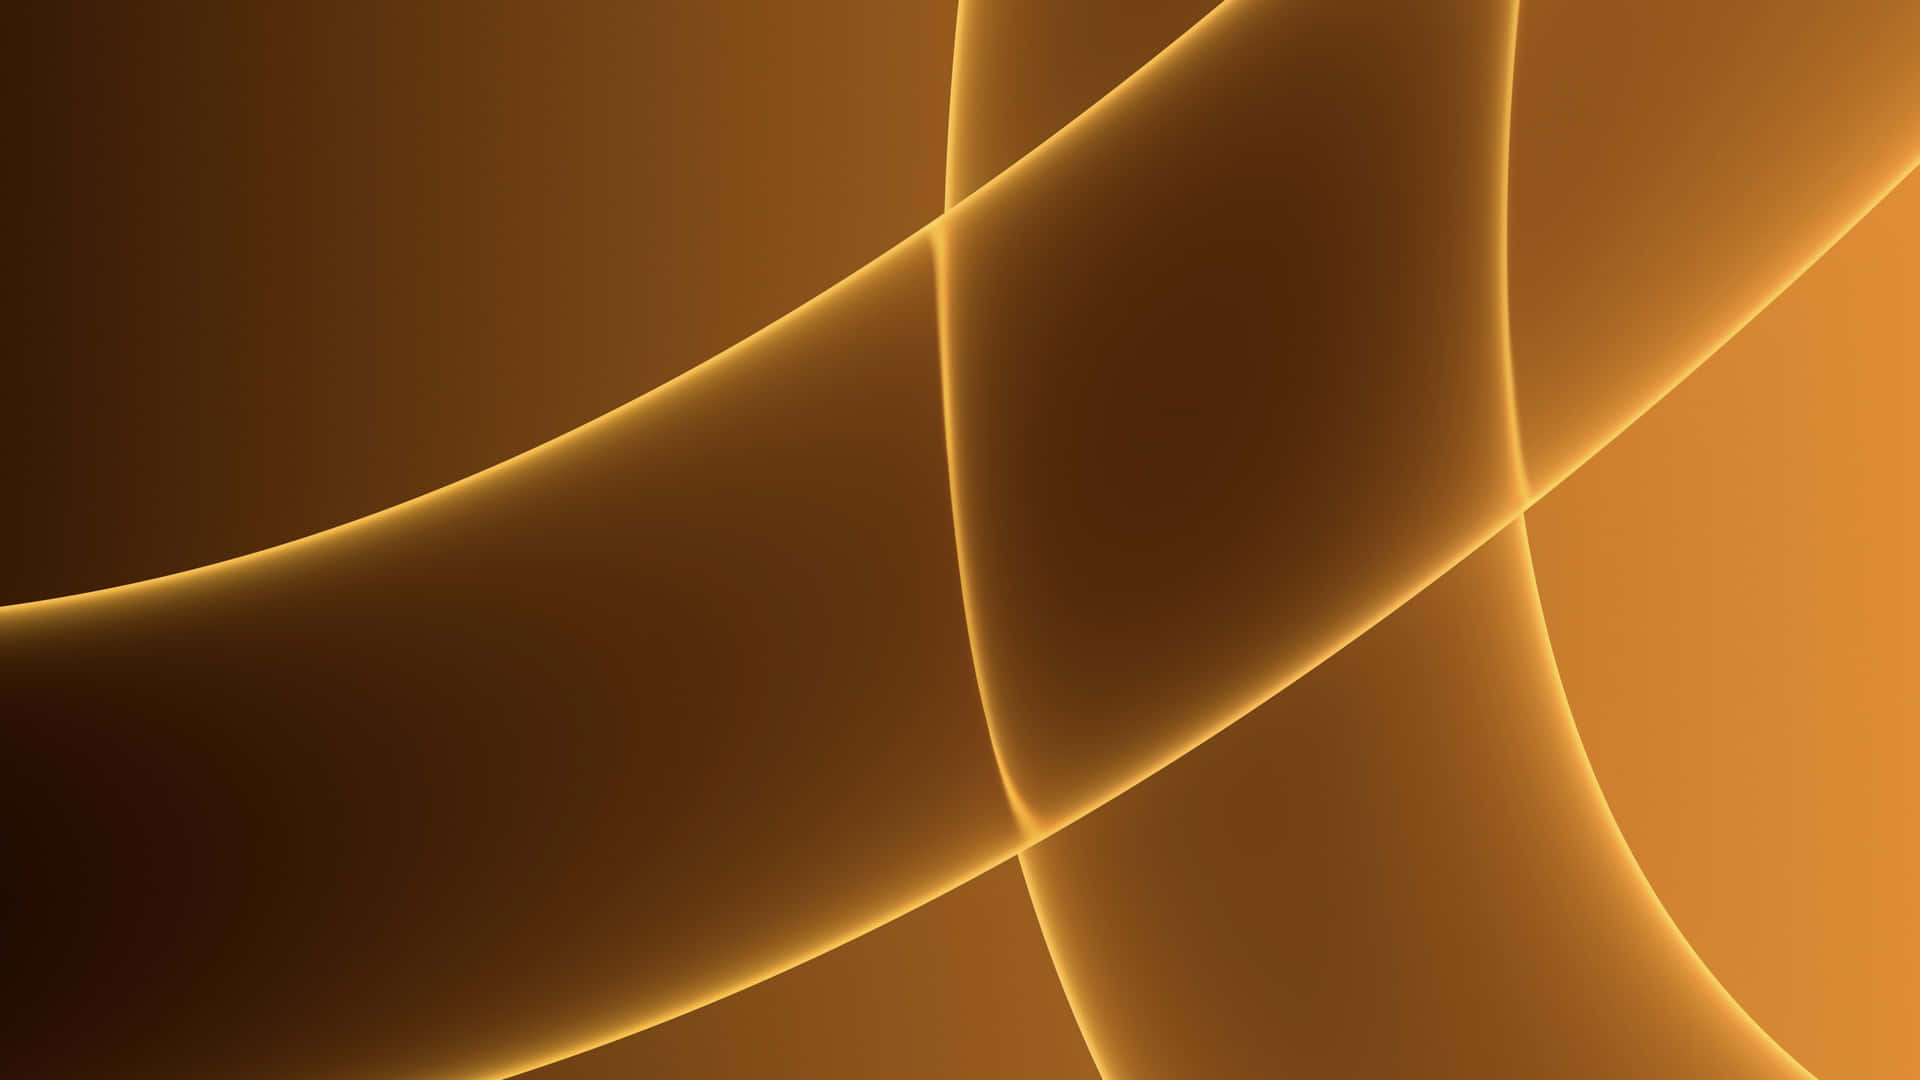 Captivating Brown Abstract Design Wallpaper